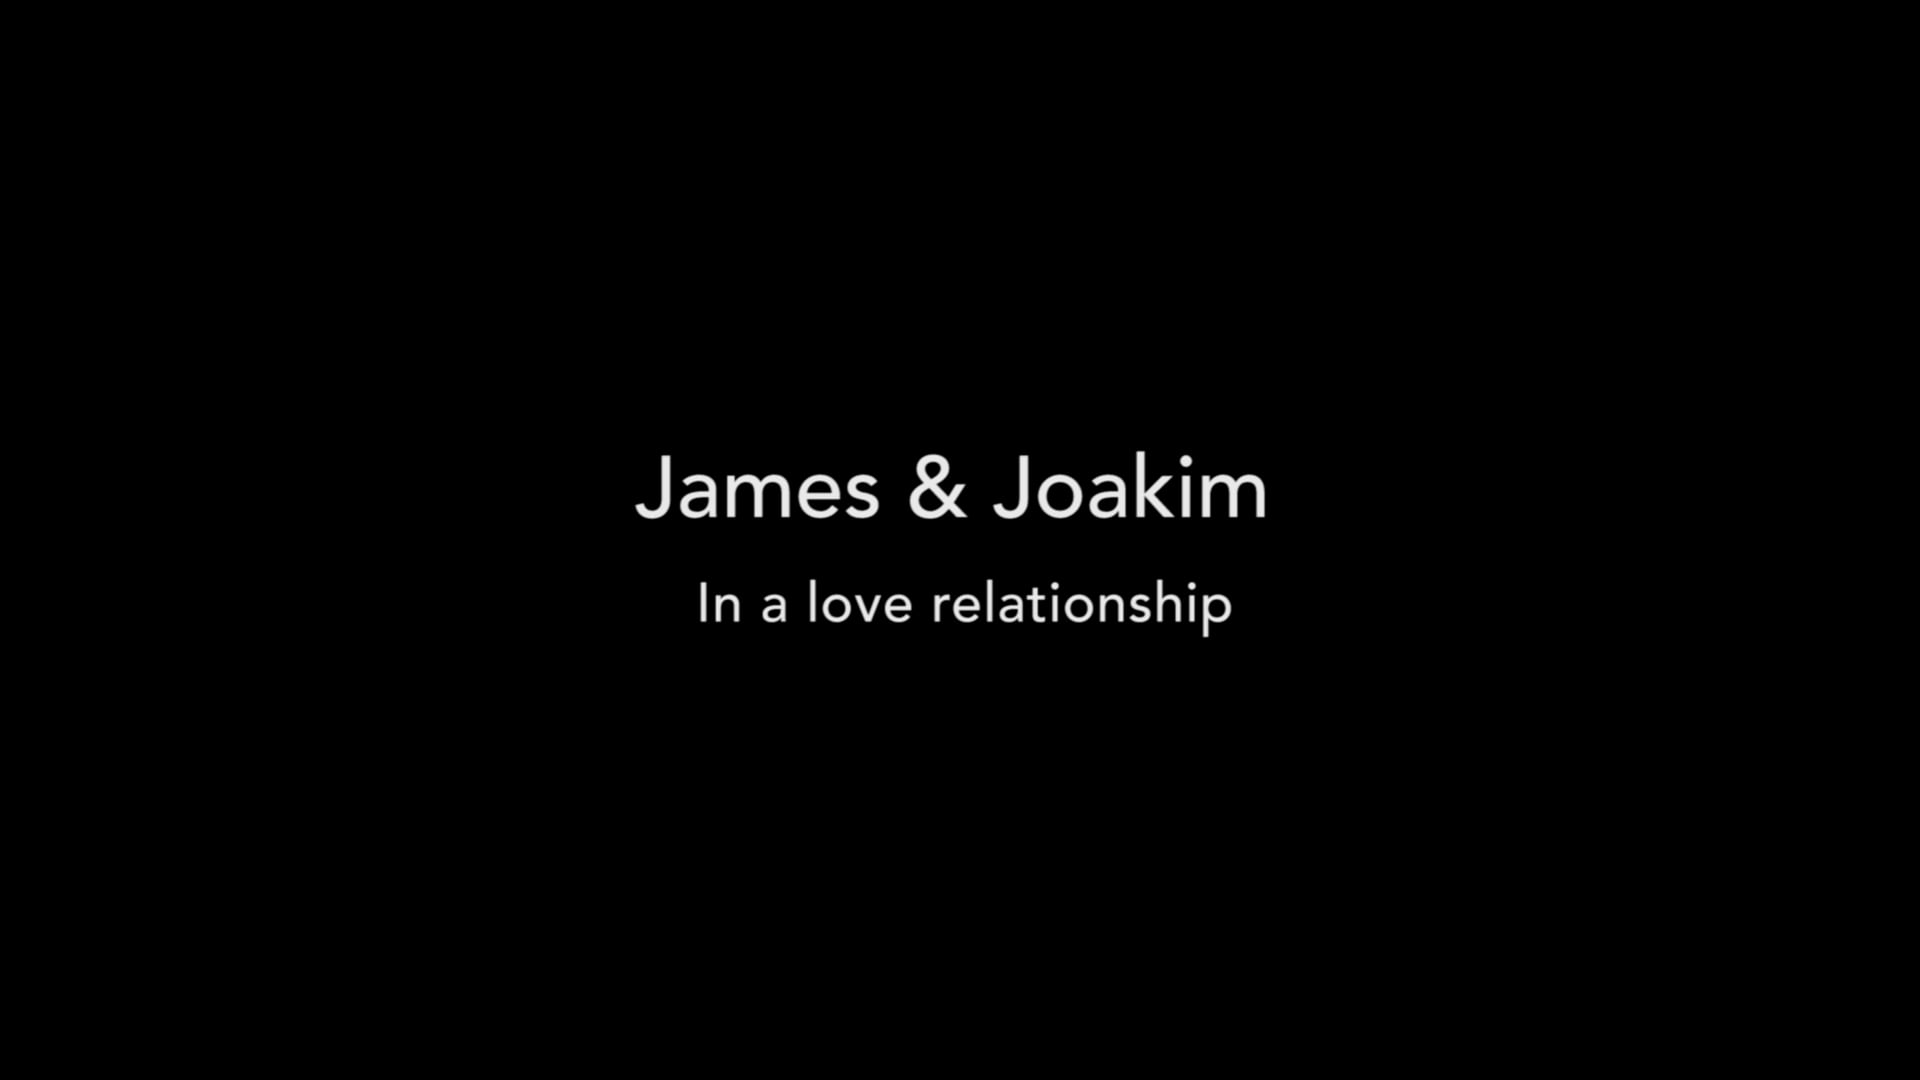 James and Joakim in a love relationship